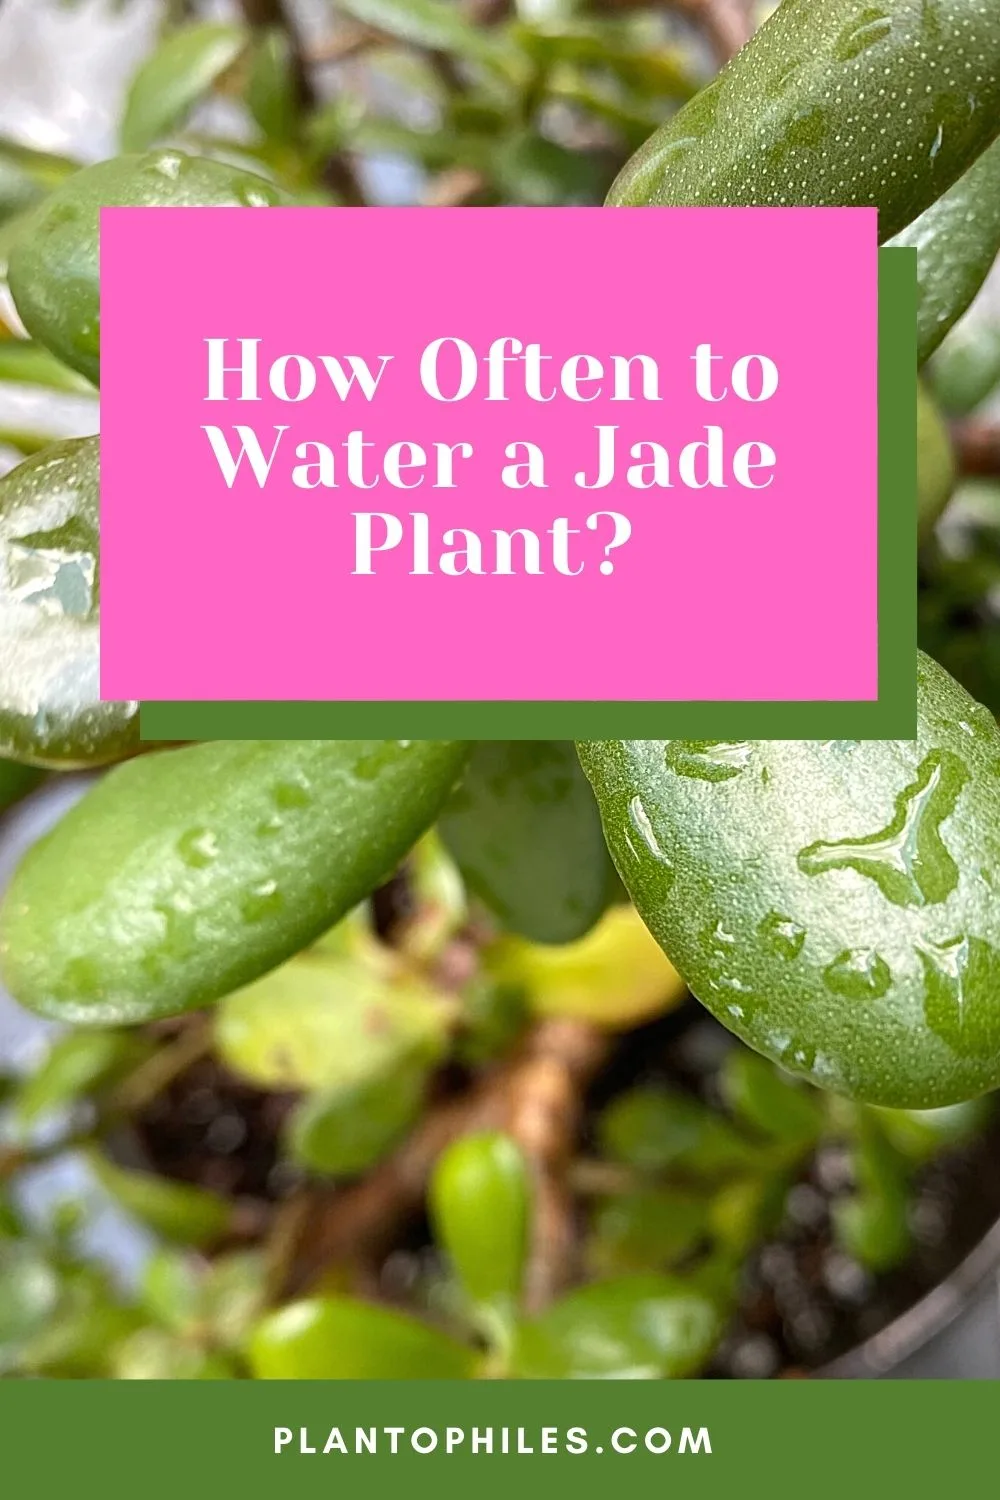 How Often to Water a Jade Plant?